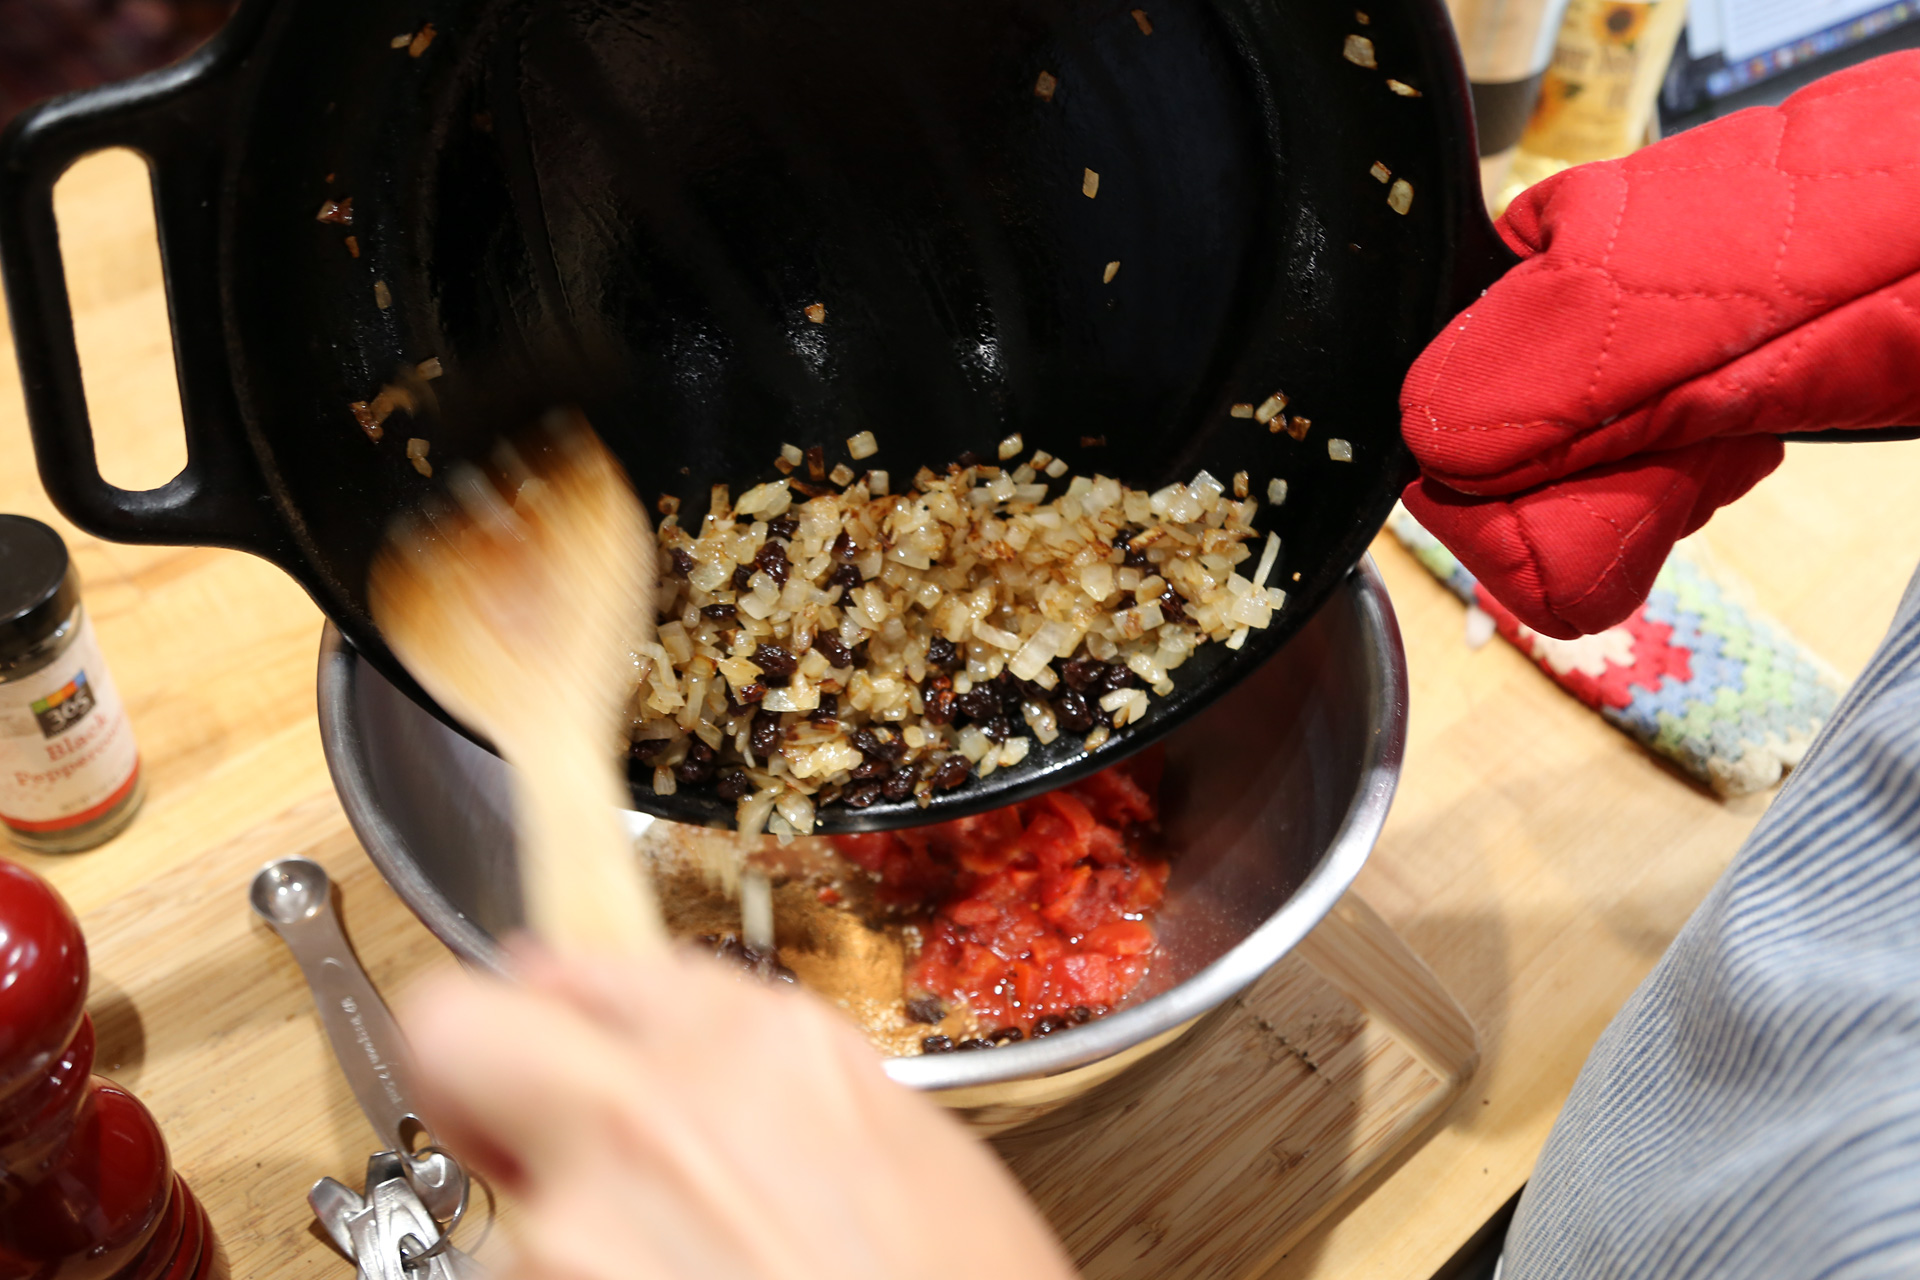  Transfer the onion mixture to the bowl with the sesame seeds.